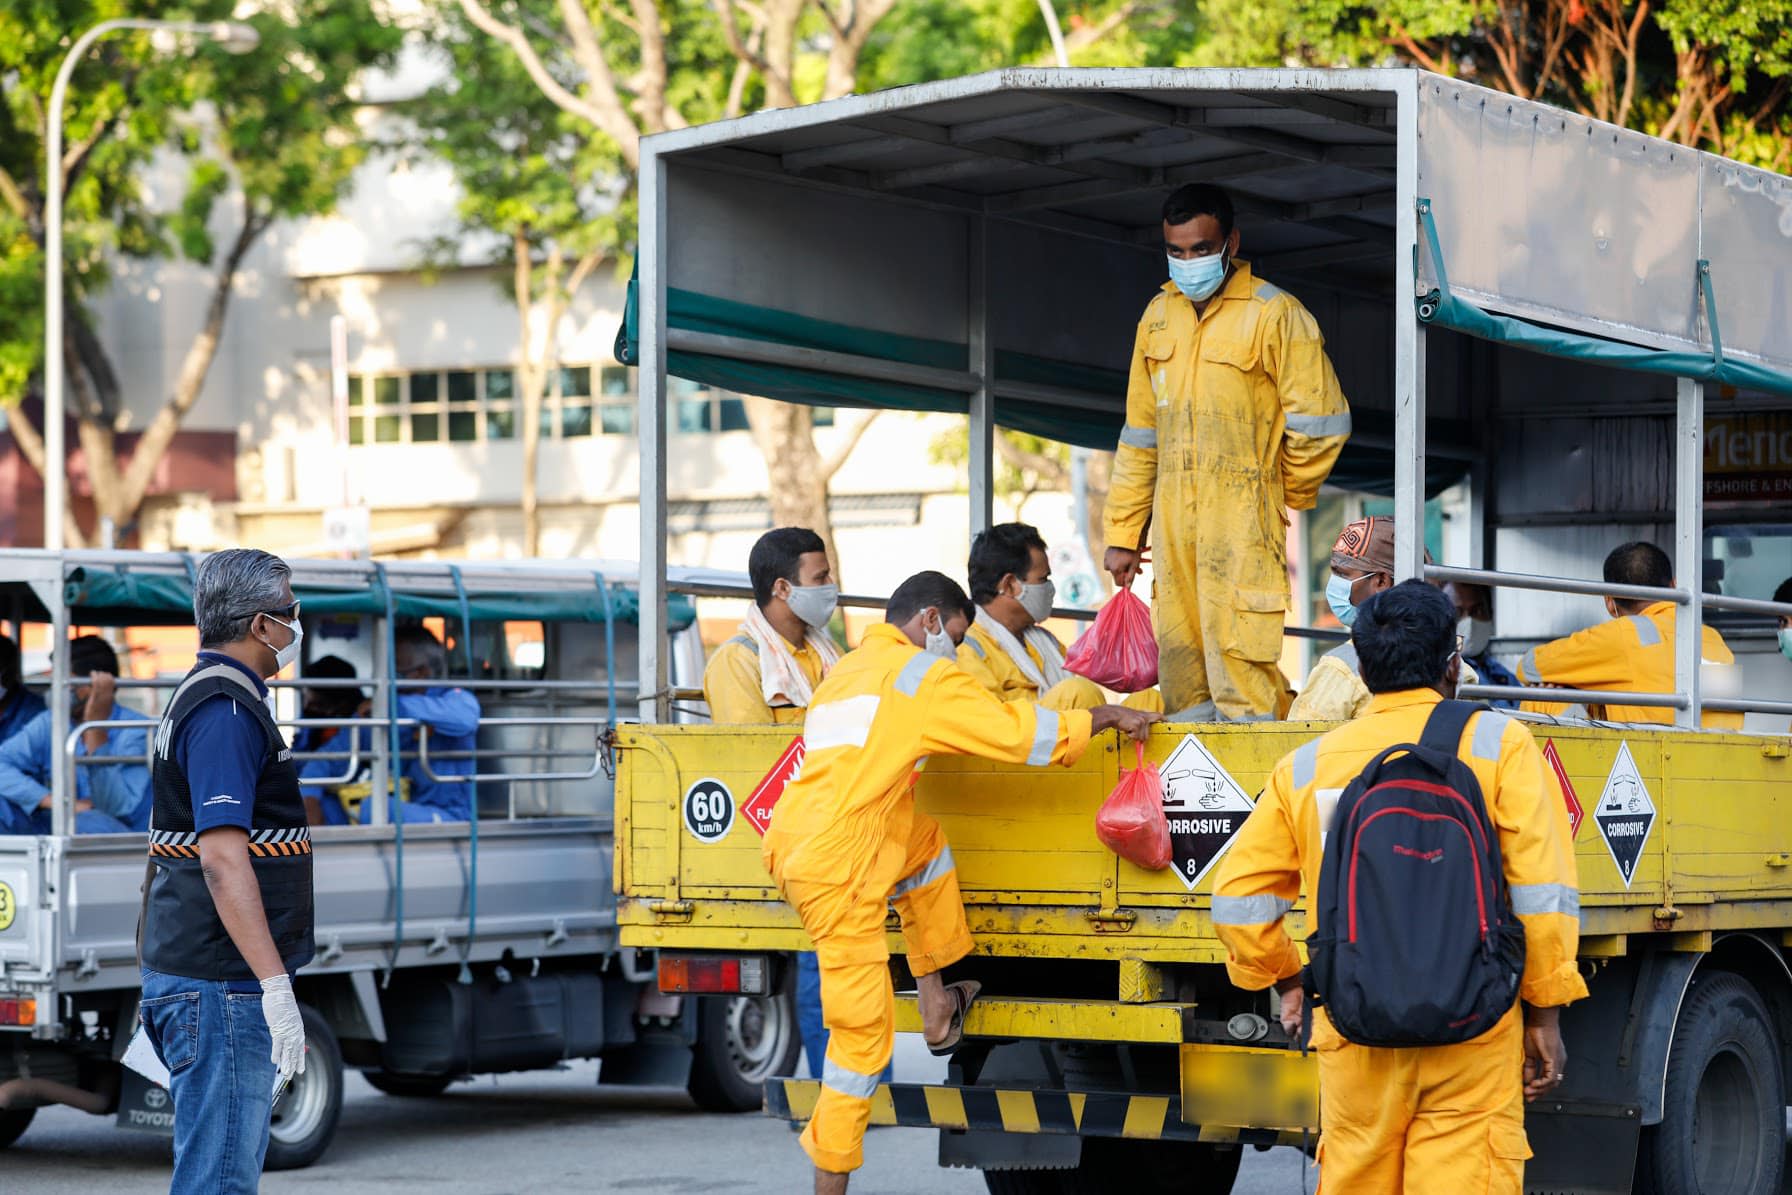 COVID-19: Singapore isolates construction workers to battle surging infections